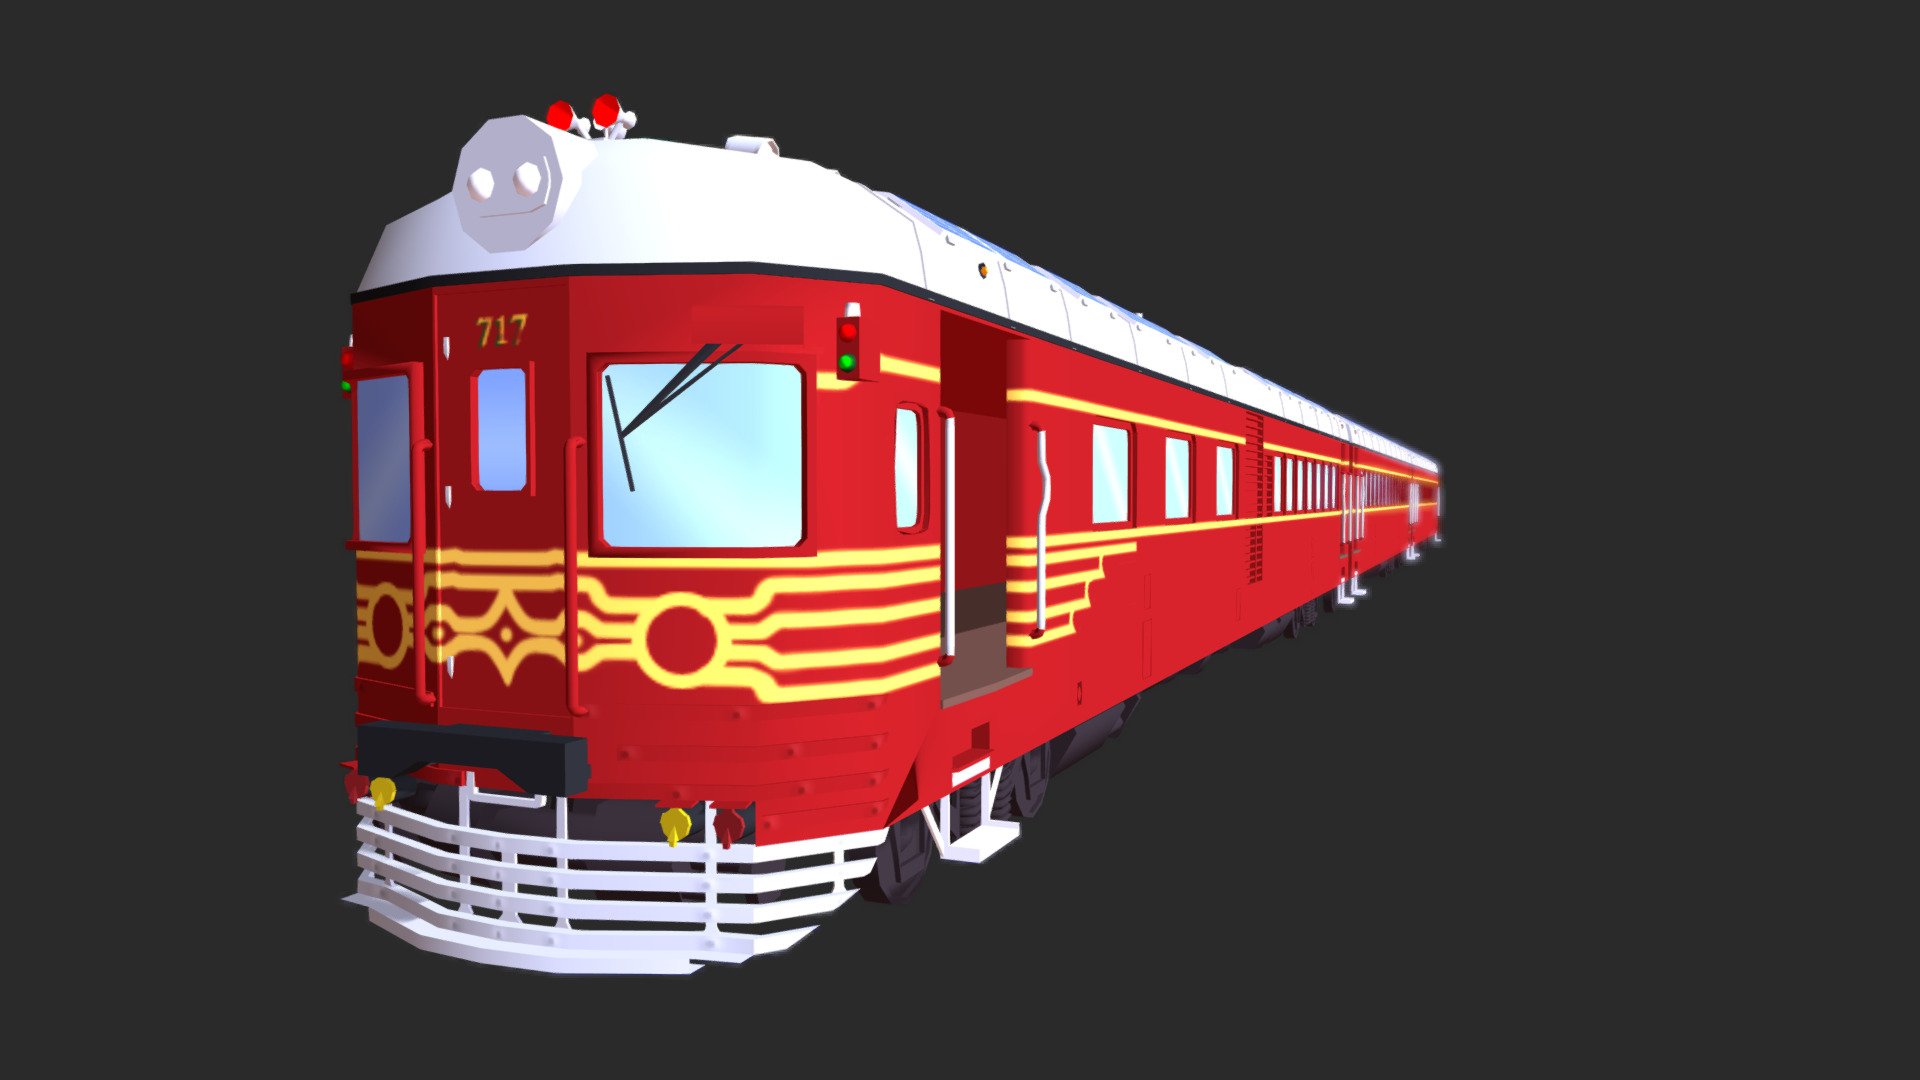 A solar-powered train made for the Boktai fangame Kura5, where it serves as the outside of a train dungeon
https://kura5.tumblr.com/

It is modelled after the Byron Bay Train
https://byronbaytrain.com.au/

(I might add the toon outline effect later on like my previous Boktai models, when I figure out how I can decently do it in Blender as I don't use 3DSMAX anymore ;) )



made in februari 2019 - Solar-Powered Train (Kura5/Boktai3D) - 3D model by Xenorider (@alloces) 3d model